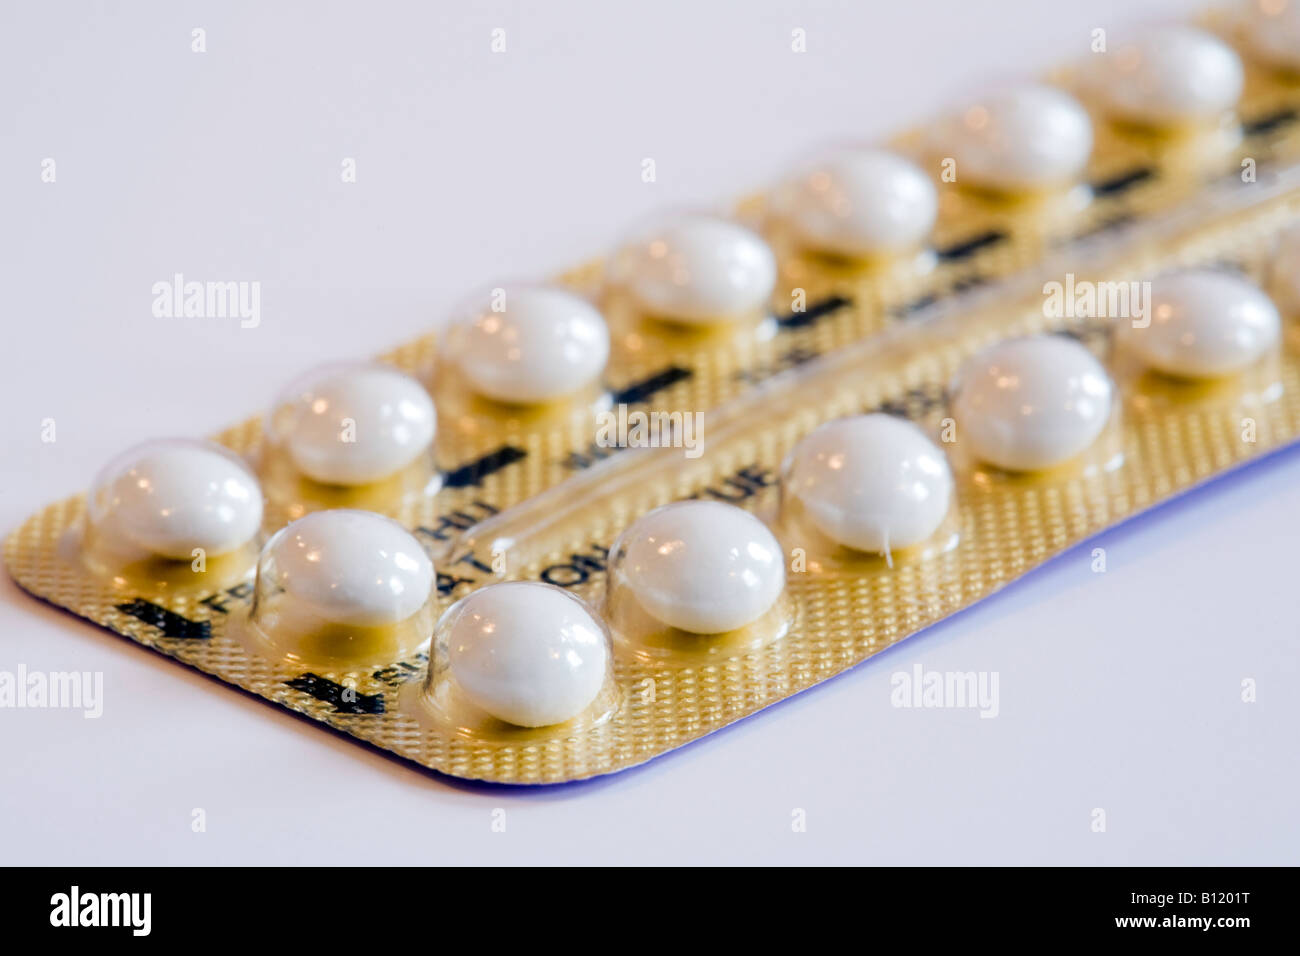 Contraceptive Pill - Close up of a pack of Microgynon contraceptive pills for female contraception, UK Stock Photo